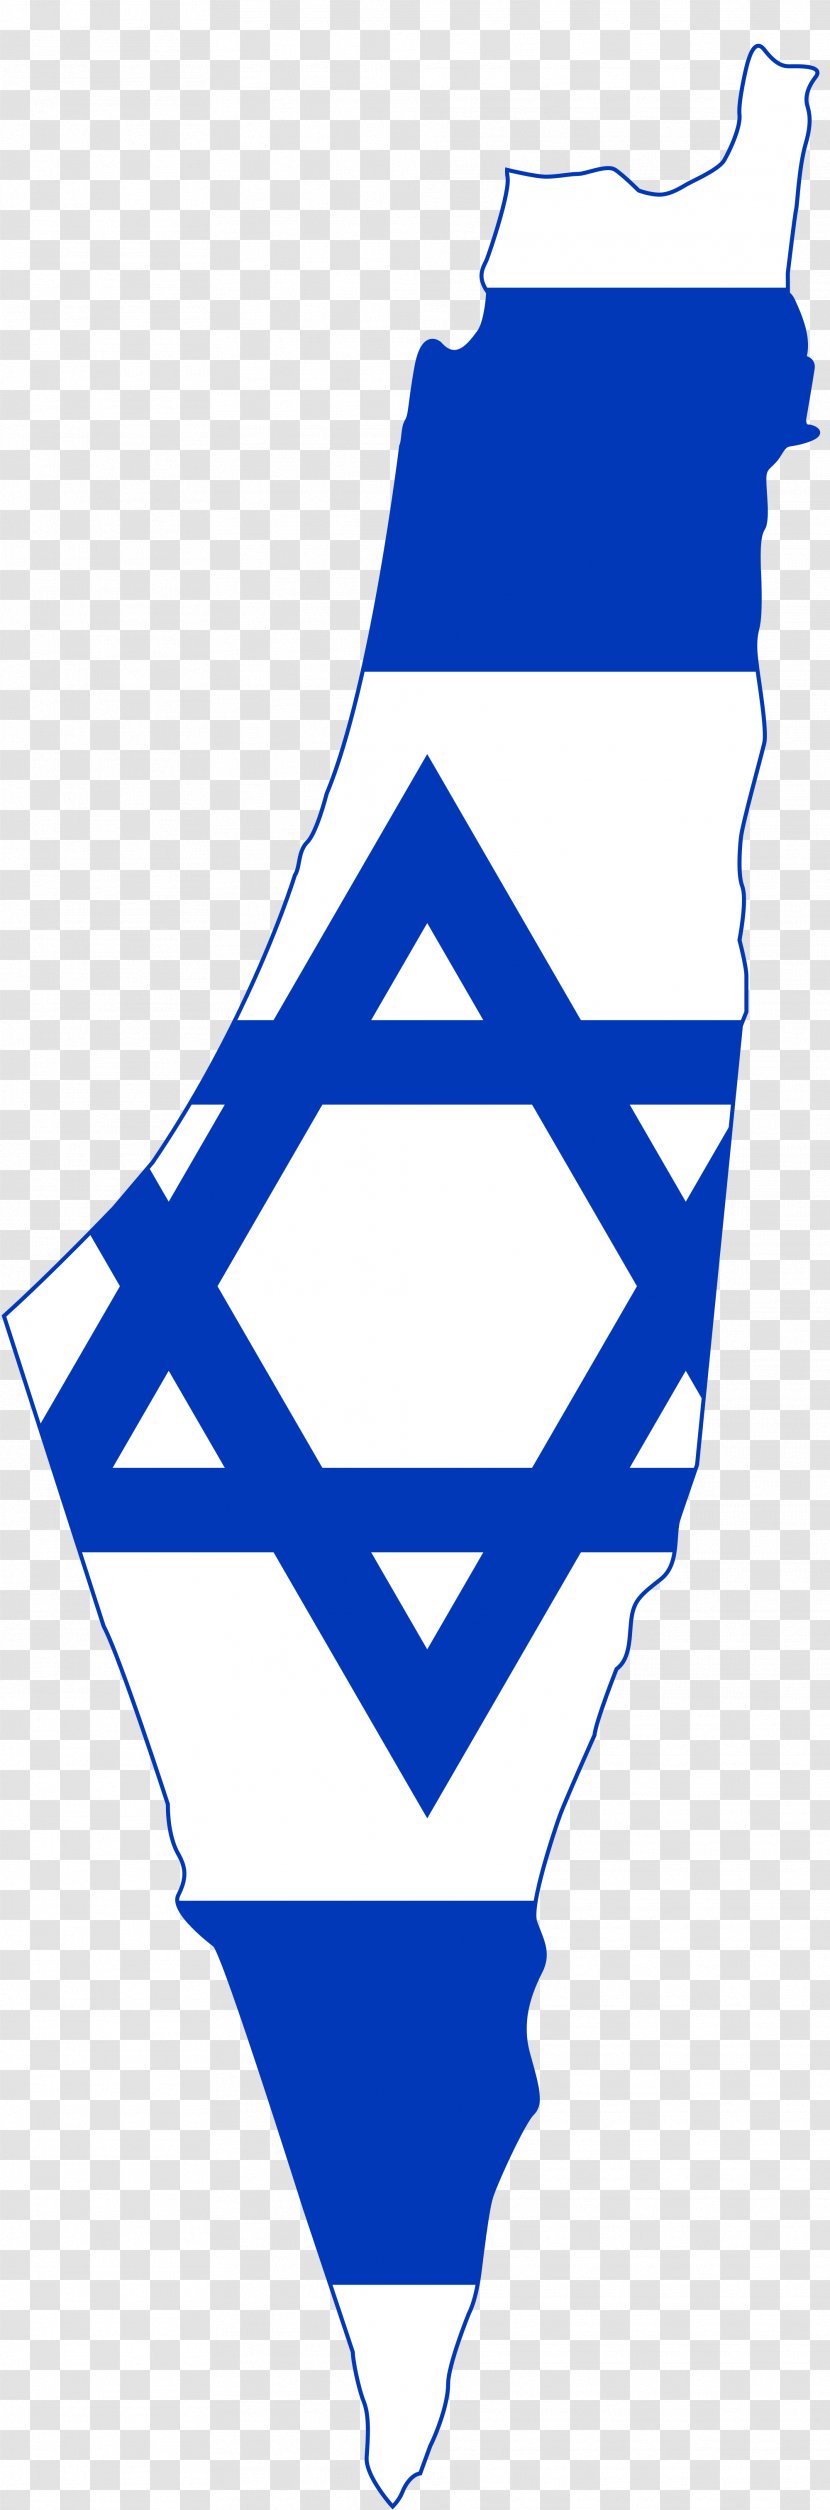 Flag Of Israel State Palestine Map Clip Art - Symmetry - Taiwan Transparent PNG